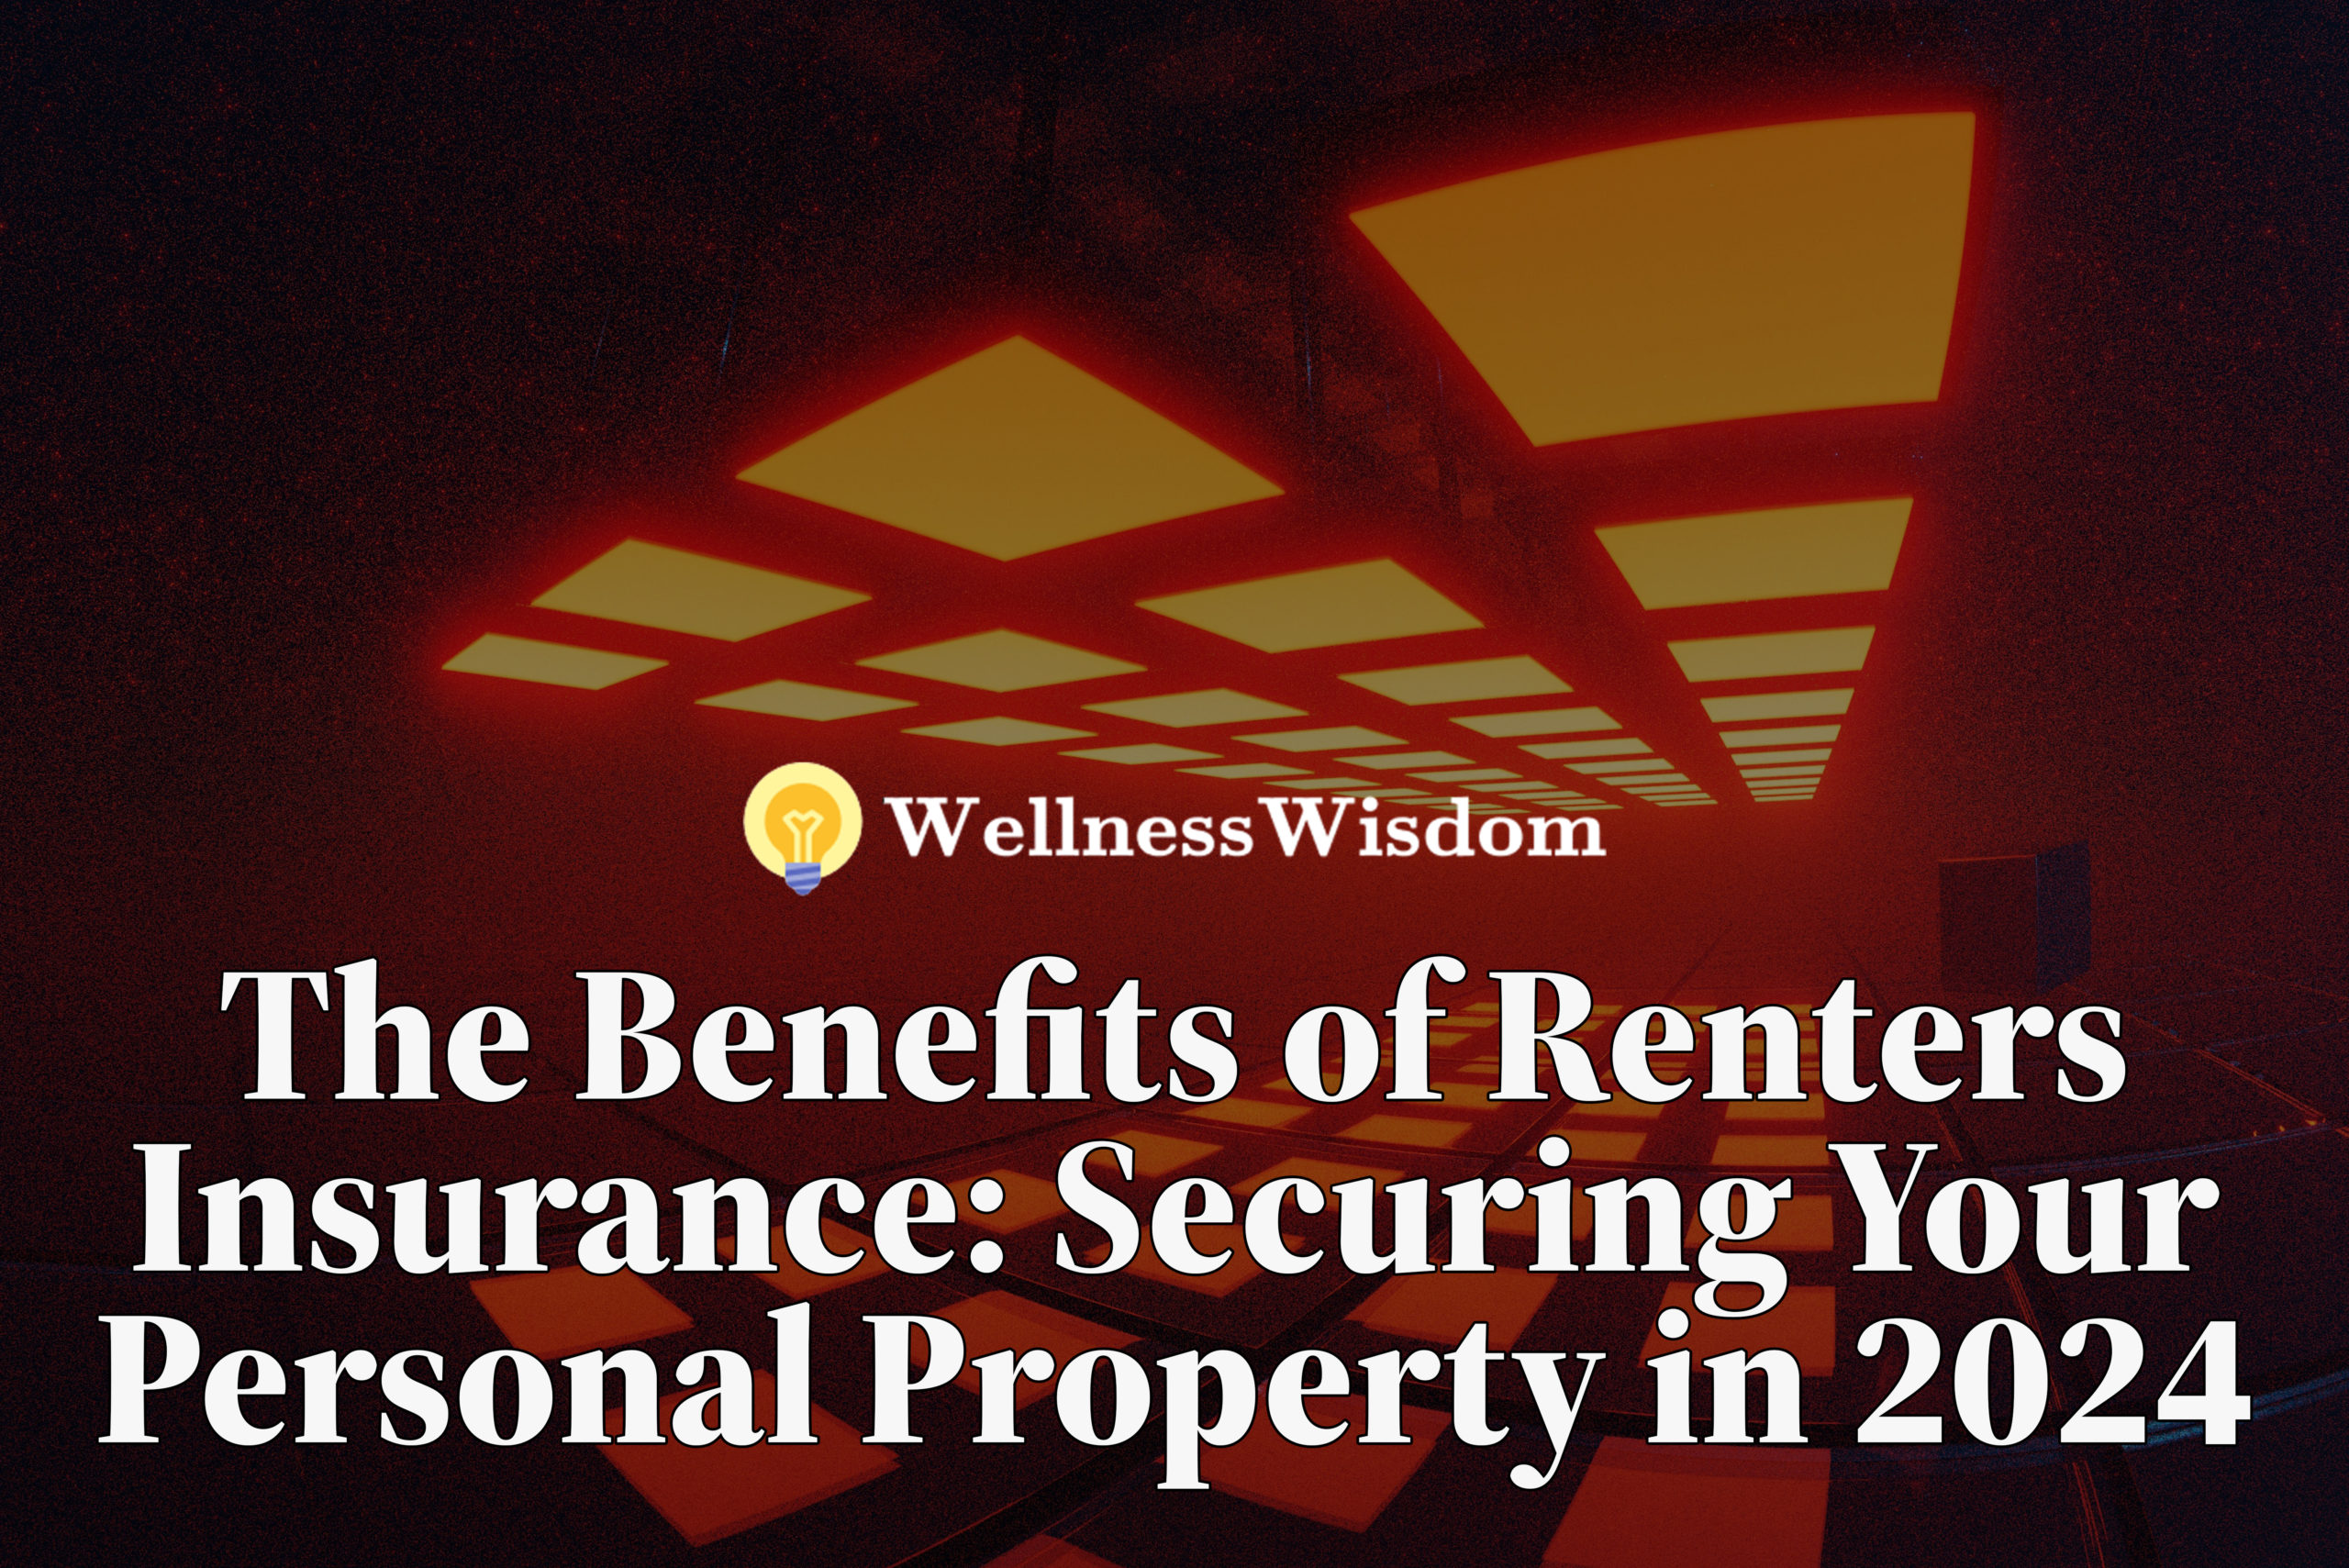 Renters insurance, Personal property protection, Liability coverage, Additional living expenses, Financial security, Peace of mind, Insurance benefits, Coverage options, Comprehensive protection, Affordable insurance, Tenant insurance, Asset protection, Legal liability, Worldwide coverage, Rental property insurance.